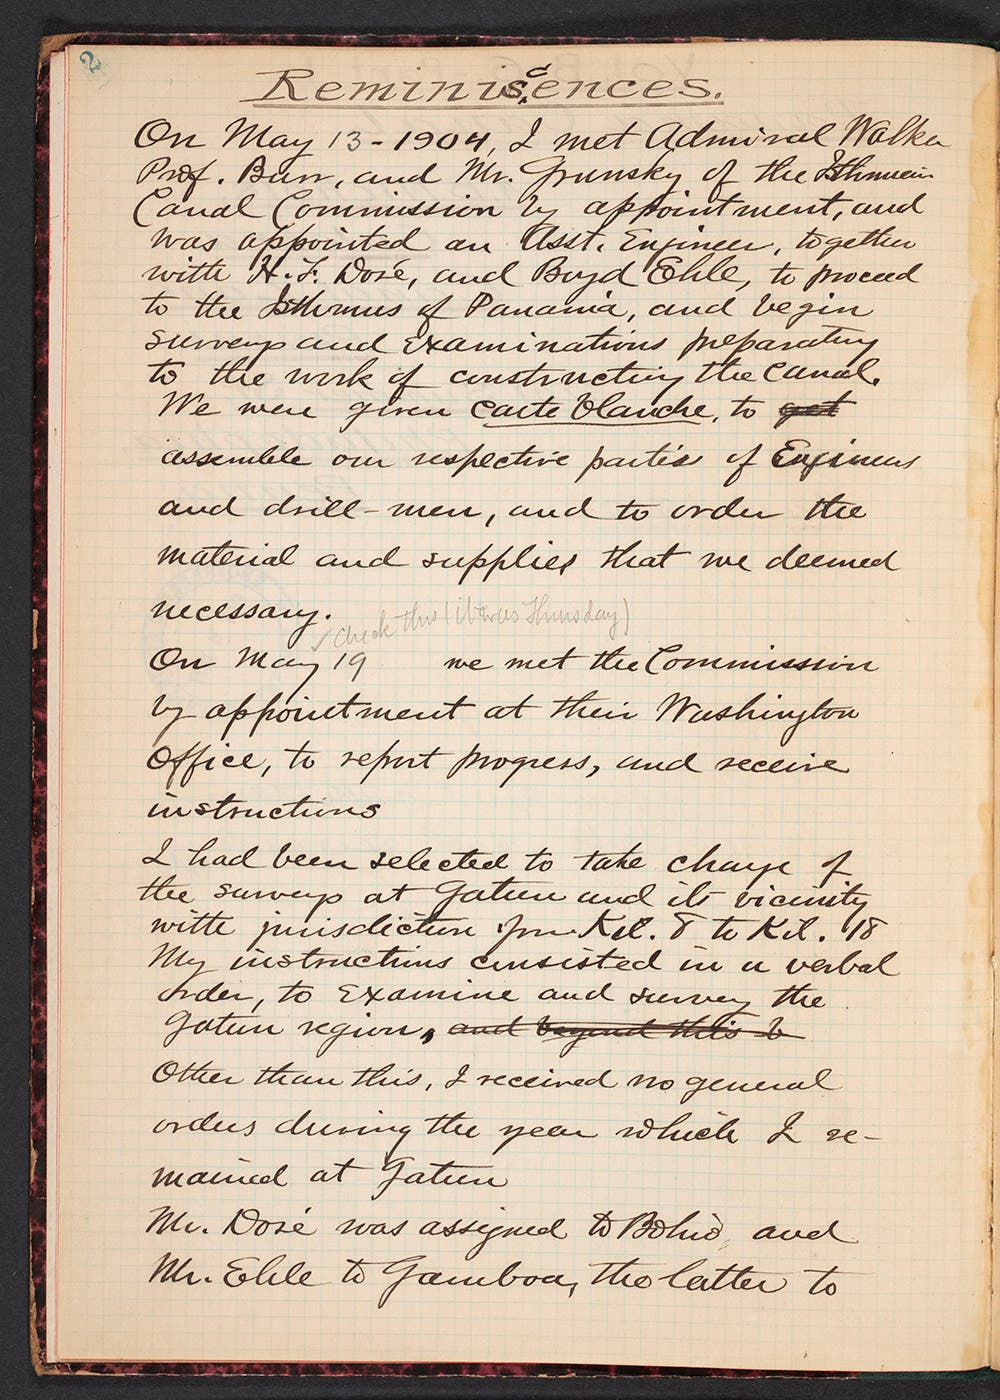 From A.B. Nichols Reminiscences.
In 1910, A.B. Nichols began recording his experiences at the Canal. This volume of Reminiscences is labeled “Part 1.” Unfortunately, any other volumes are apparently lost.
View in Digital Collection »